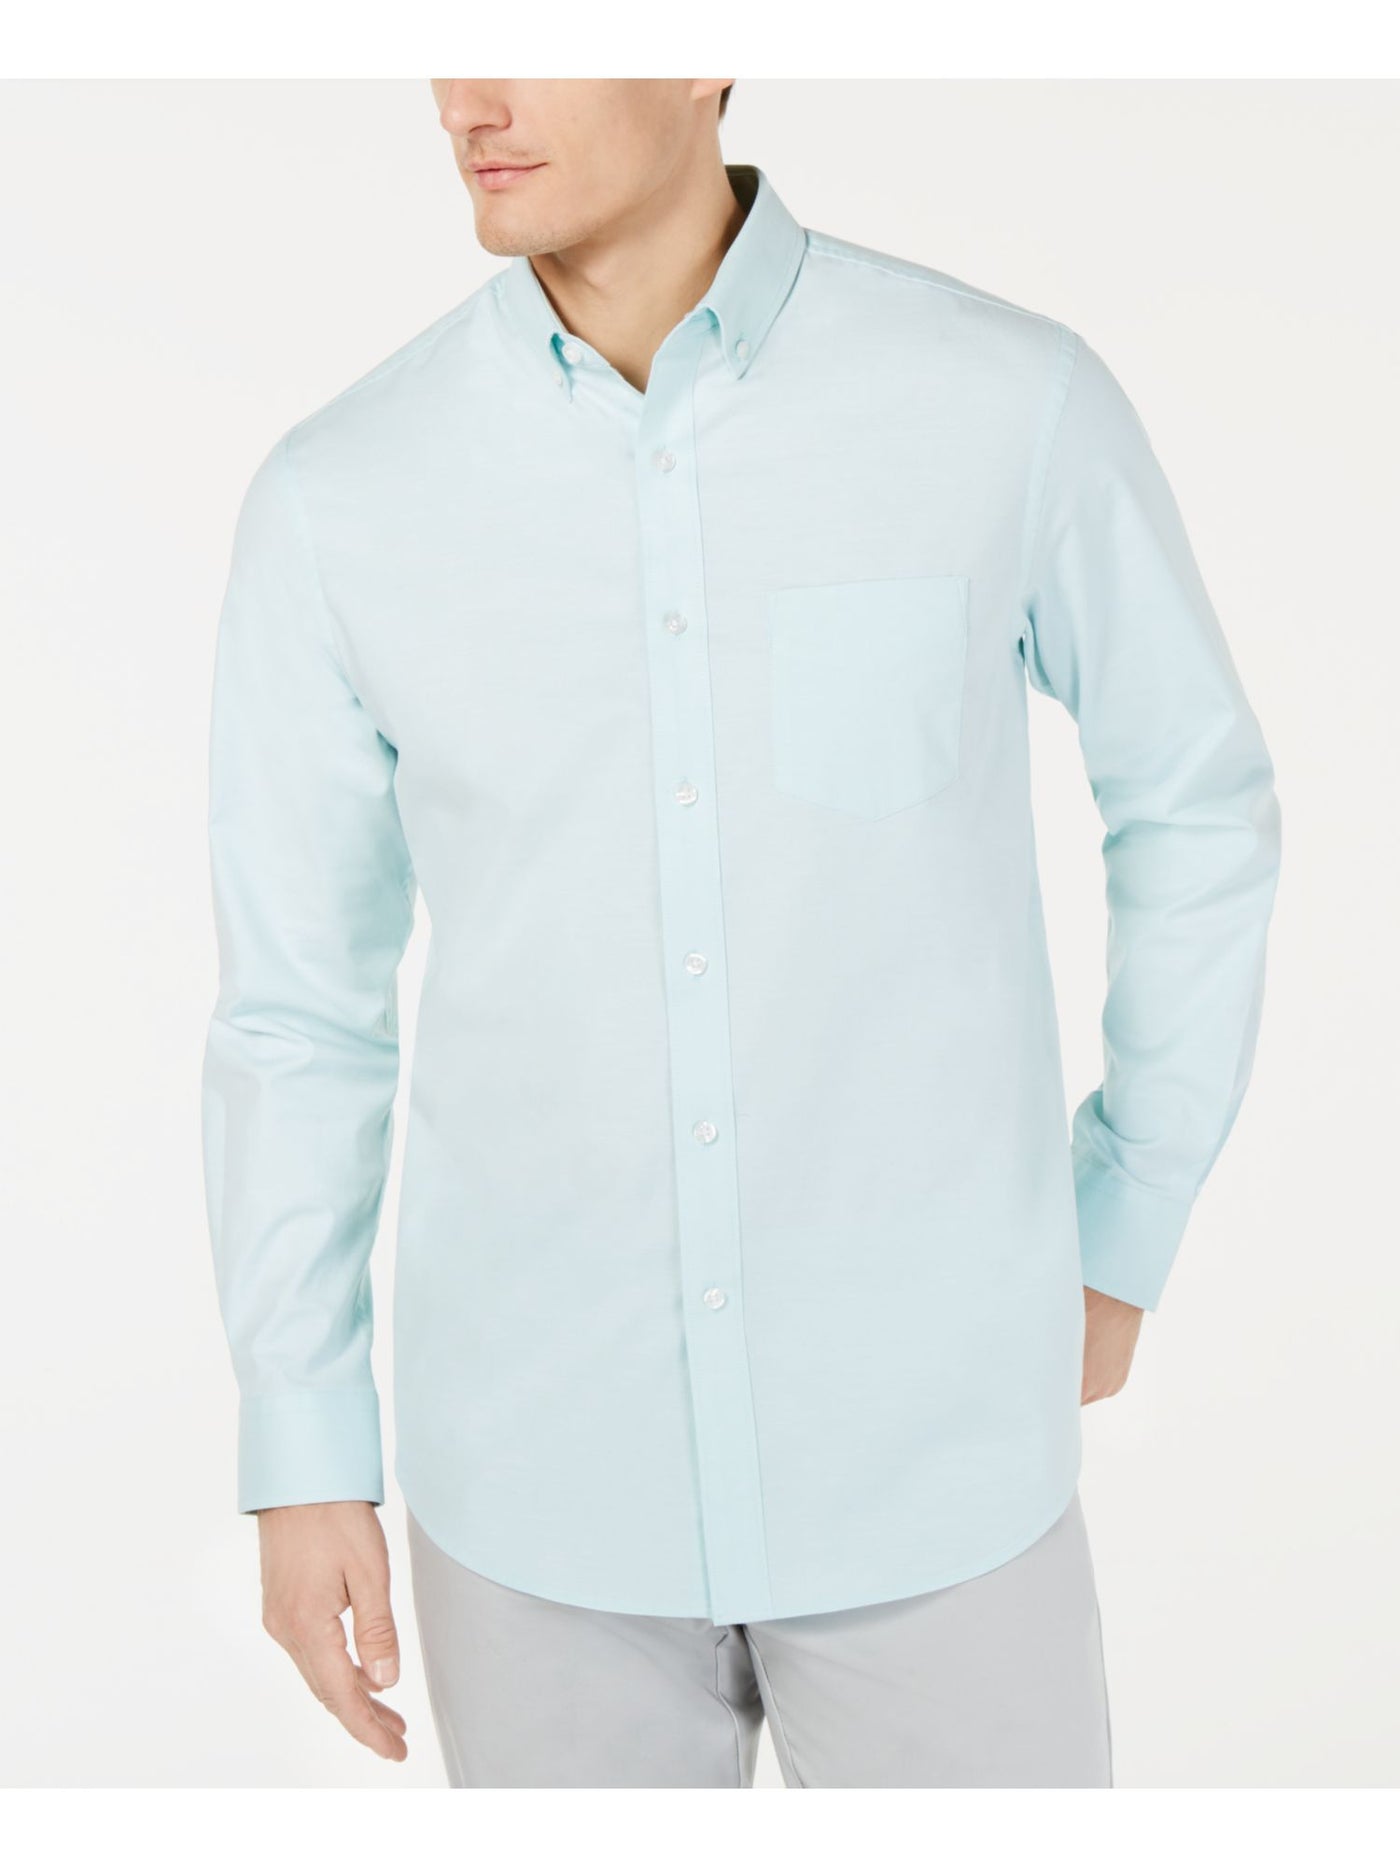 CLUBROOM Mens Turquoise Collared Shirt S